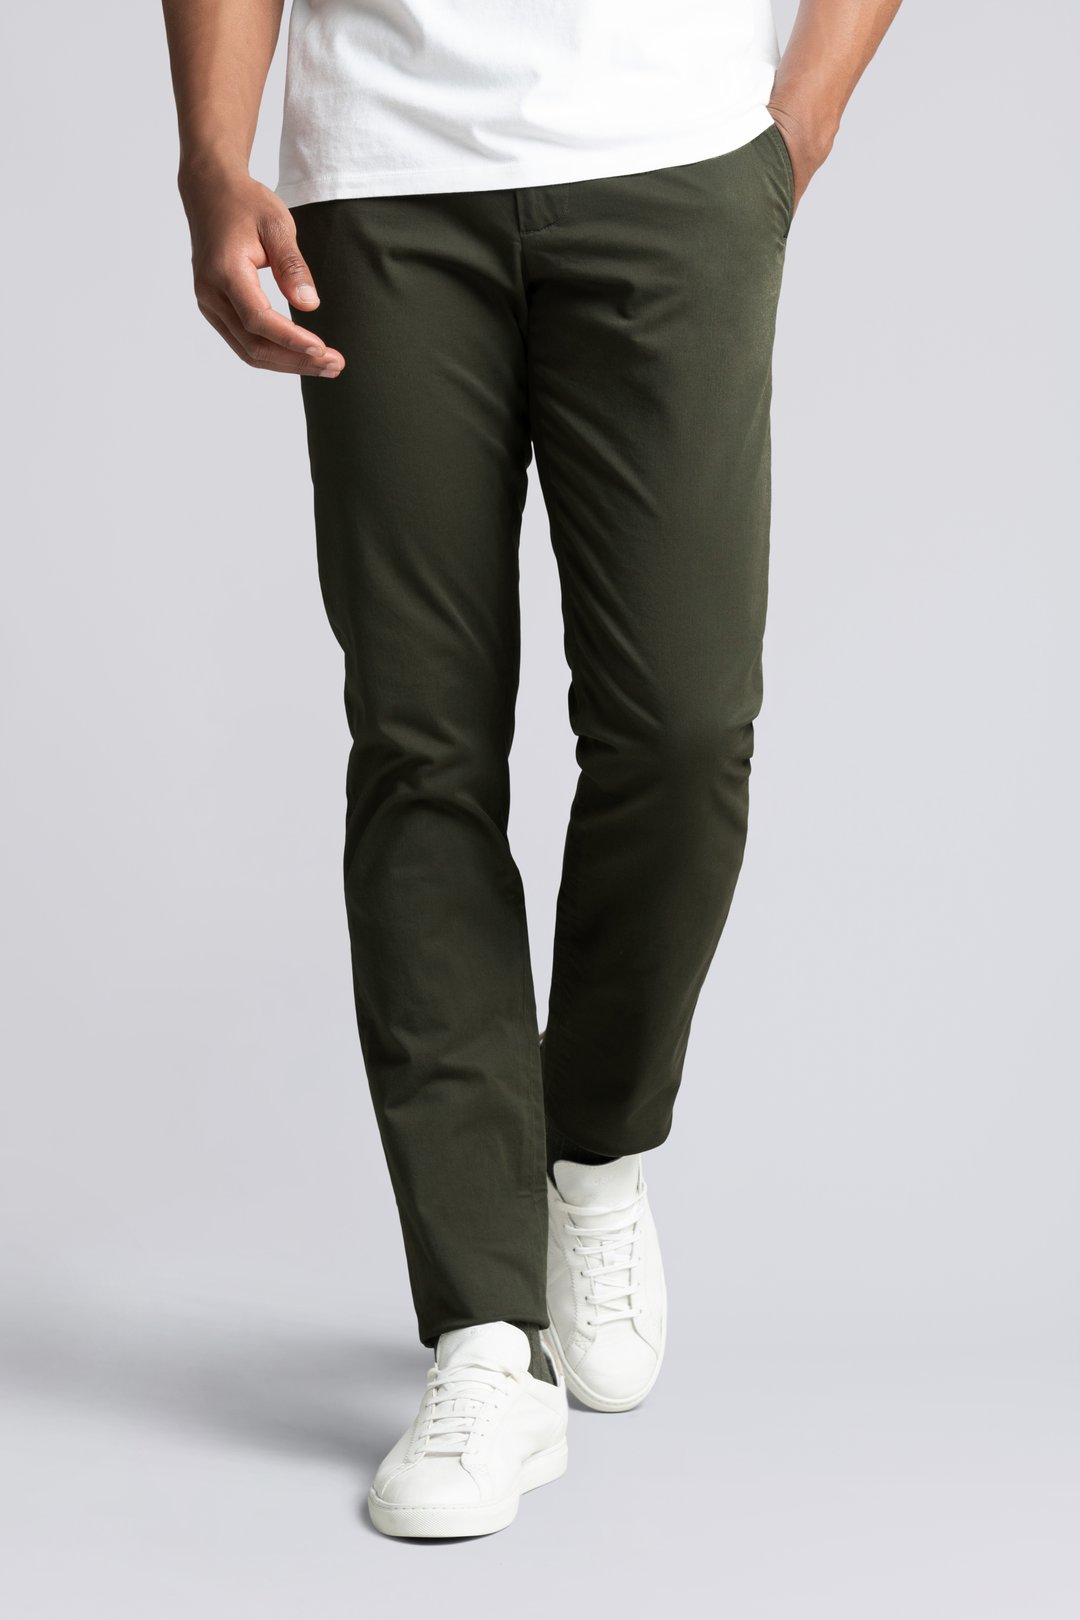 Khaki Green Chino | Tapered Cotton Stretch Trouser - ASKET